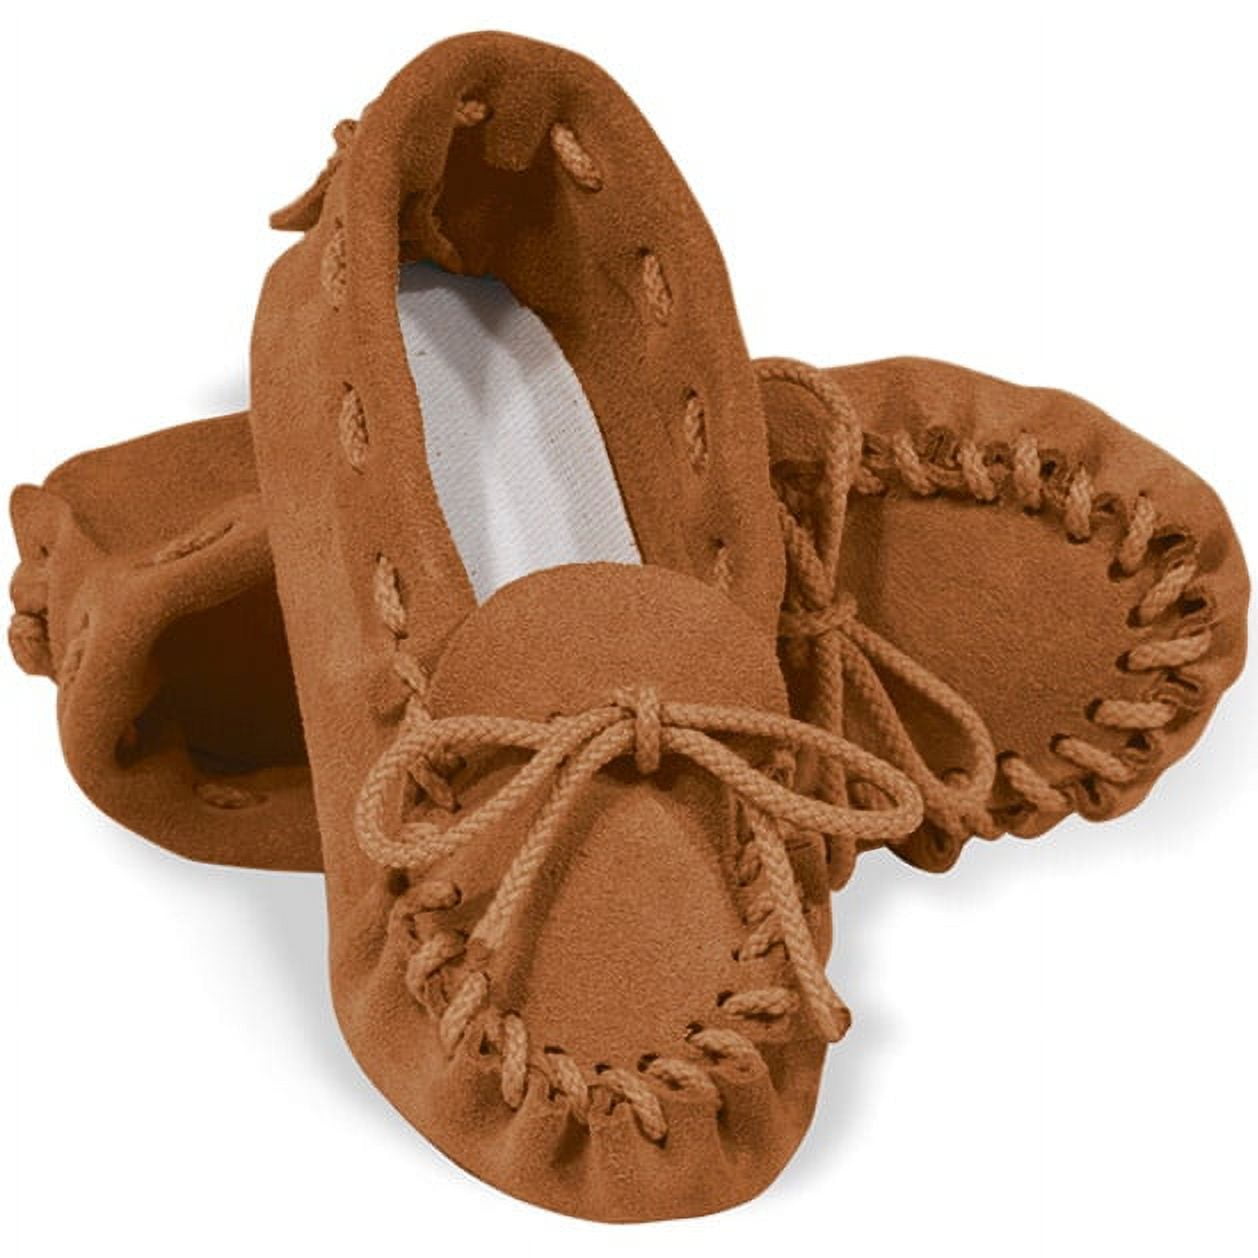 Moccasin Tandy Leather Kit House Shoe Women 10.5 to 11 Stiff Leather AS IS  1429